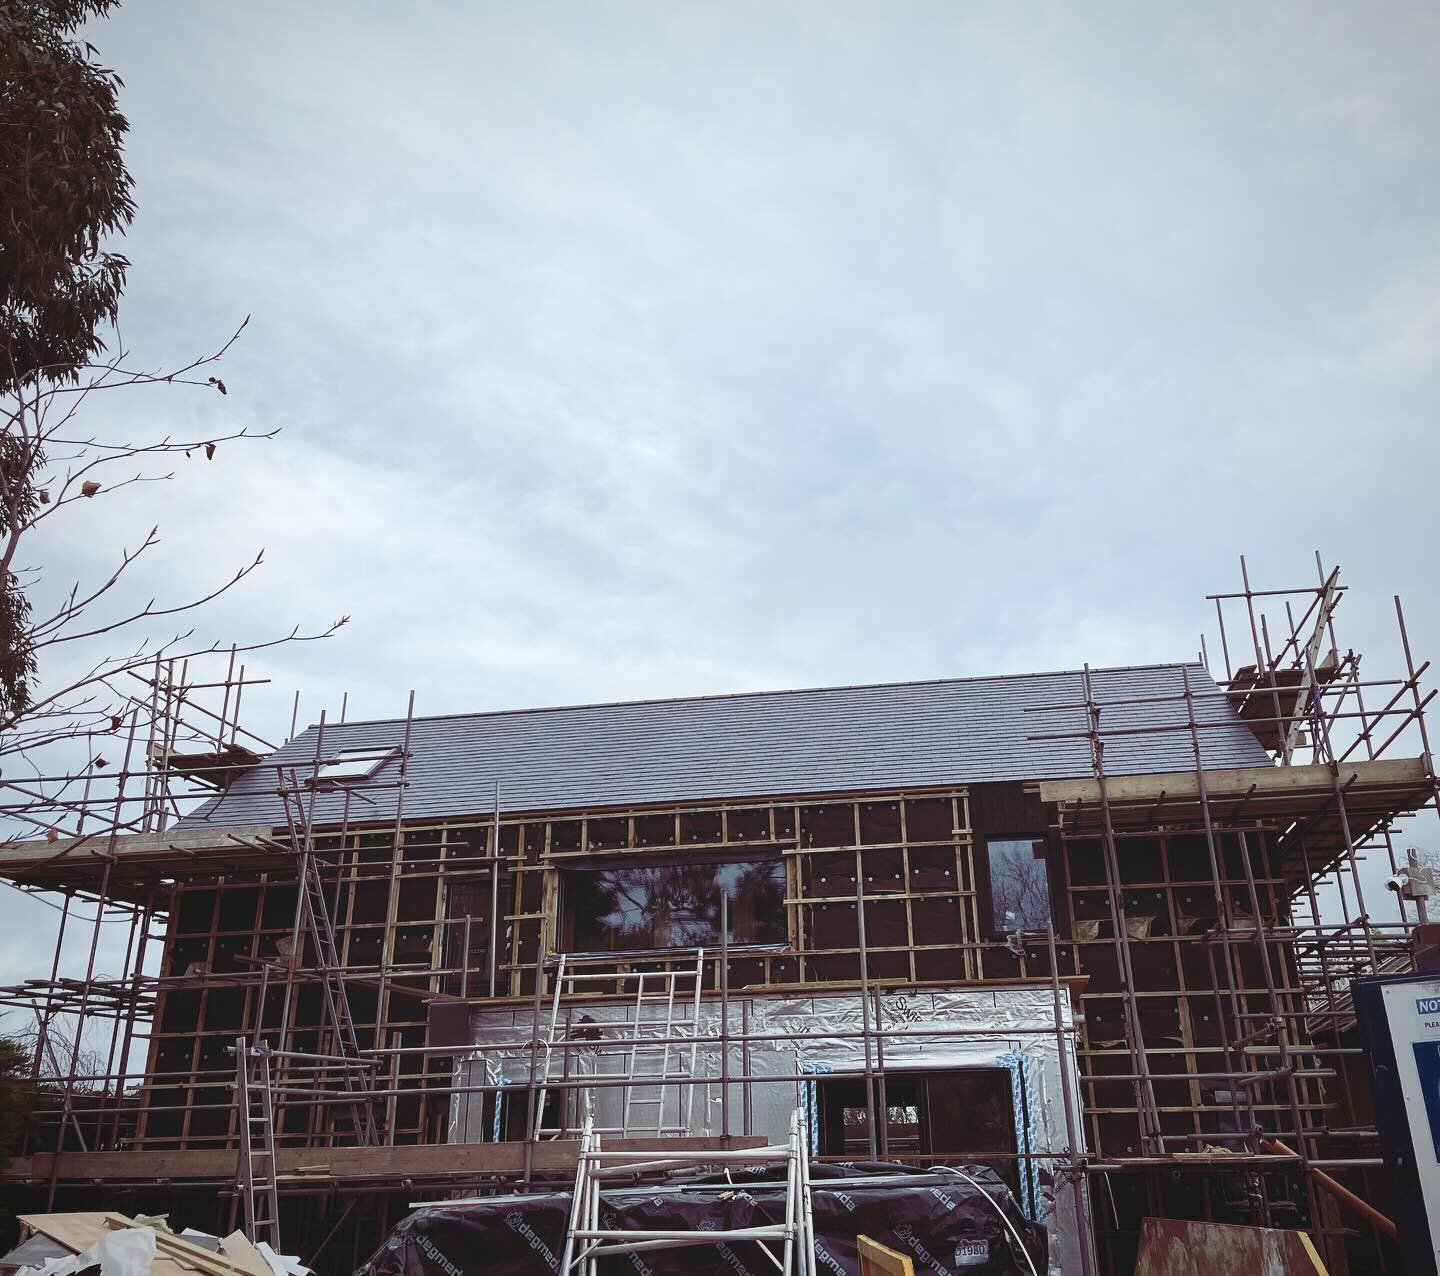 Rainy day site visit to our new build eco home in Longframlington. The smoke test results have been super&hellip; looking good for a great airtightness result! Site are busy beavering away inside, out of the rain and freezing cold. Nice work @truenor